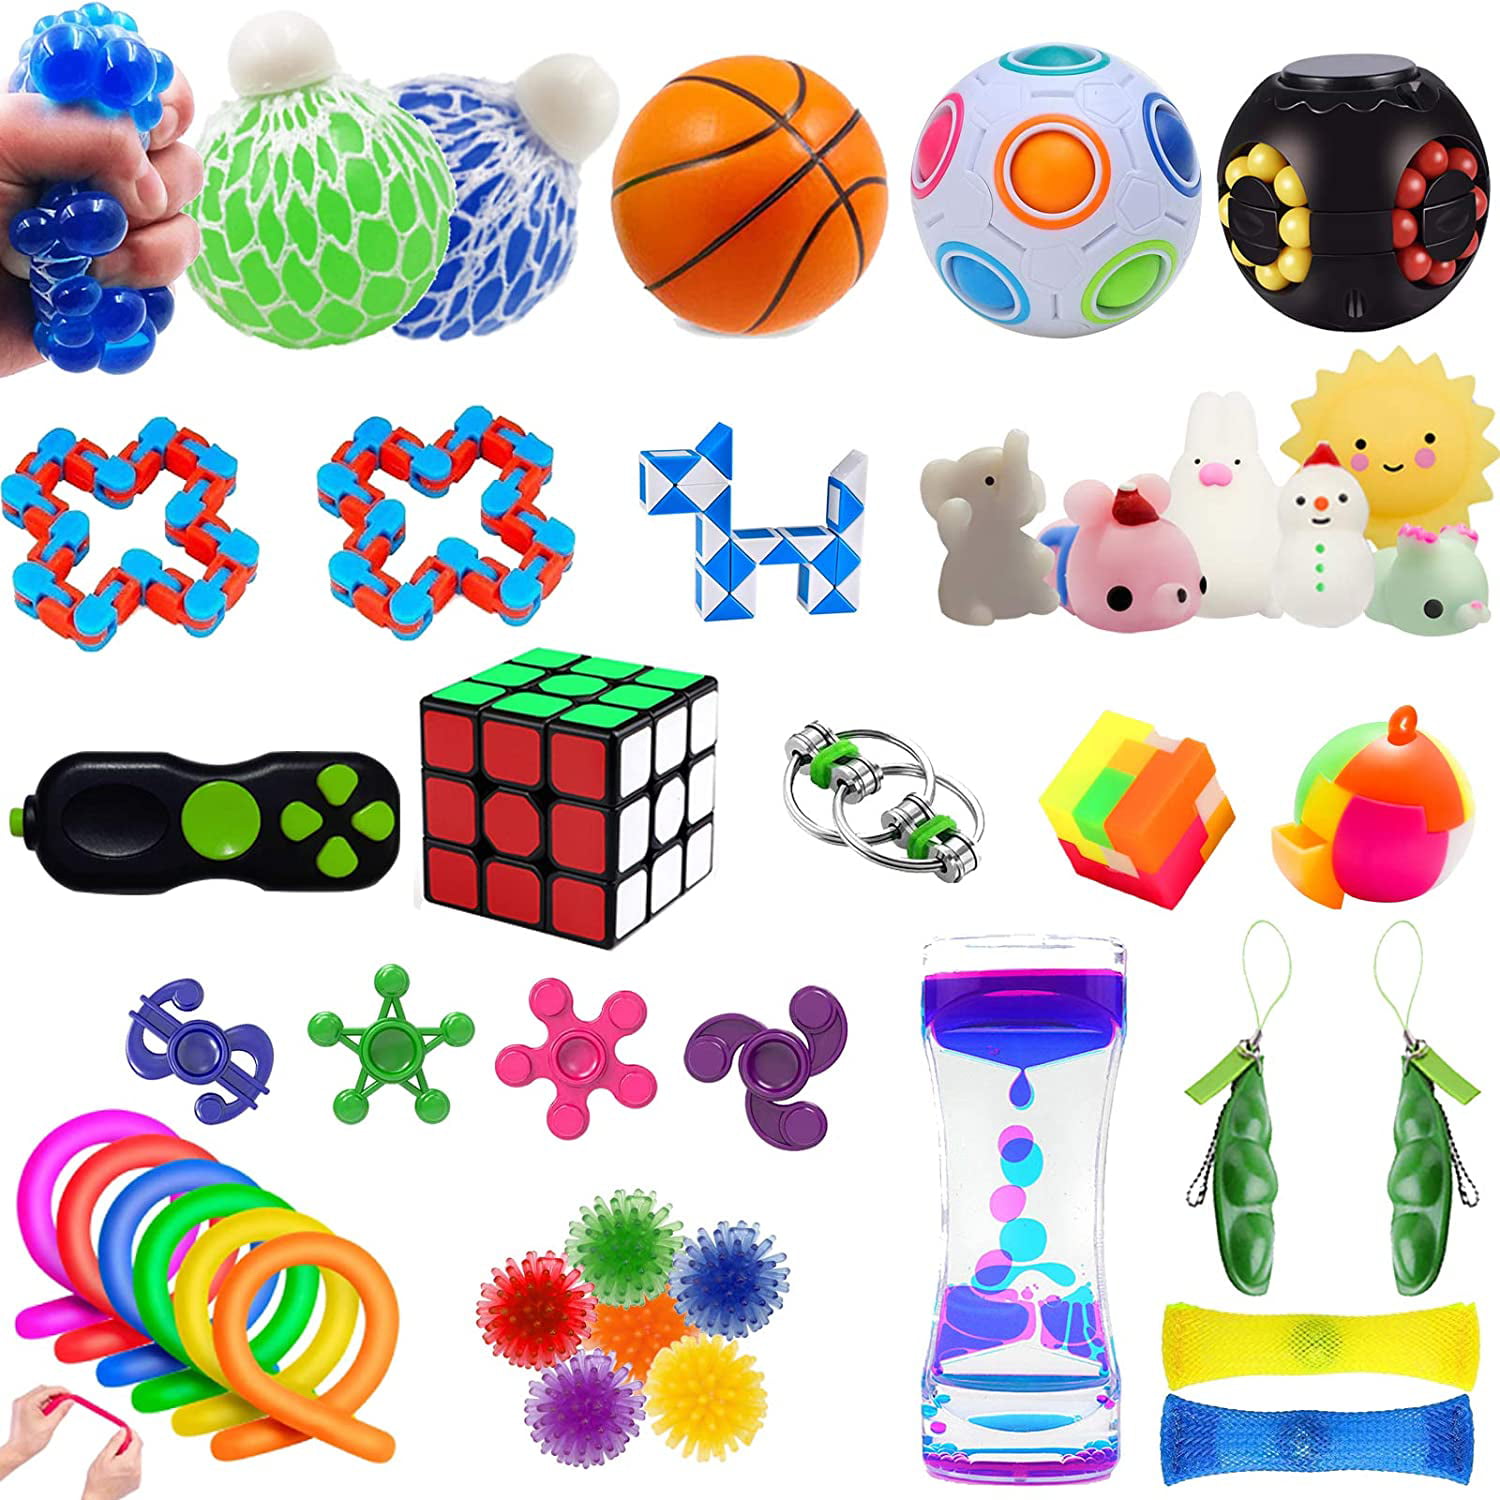 Fidget Sensory Toys for Autism ADHD Calming Stress Relief Concentration 